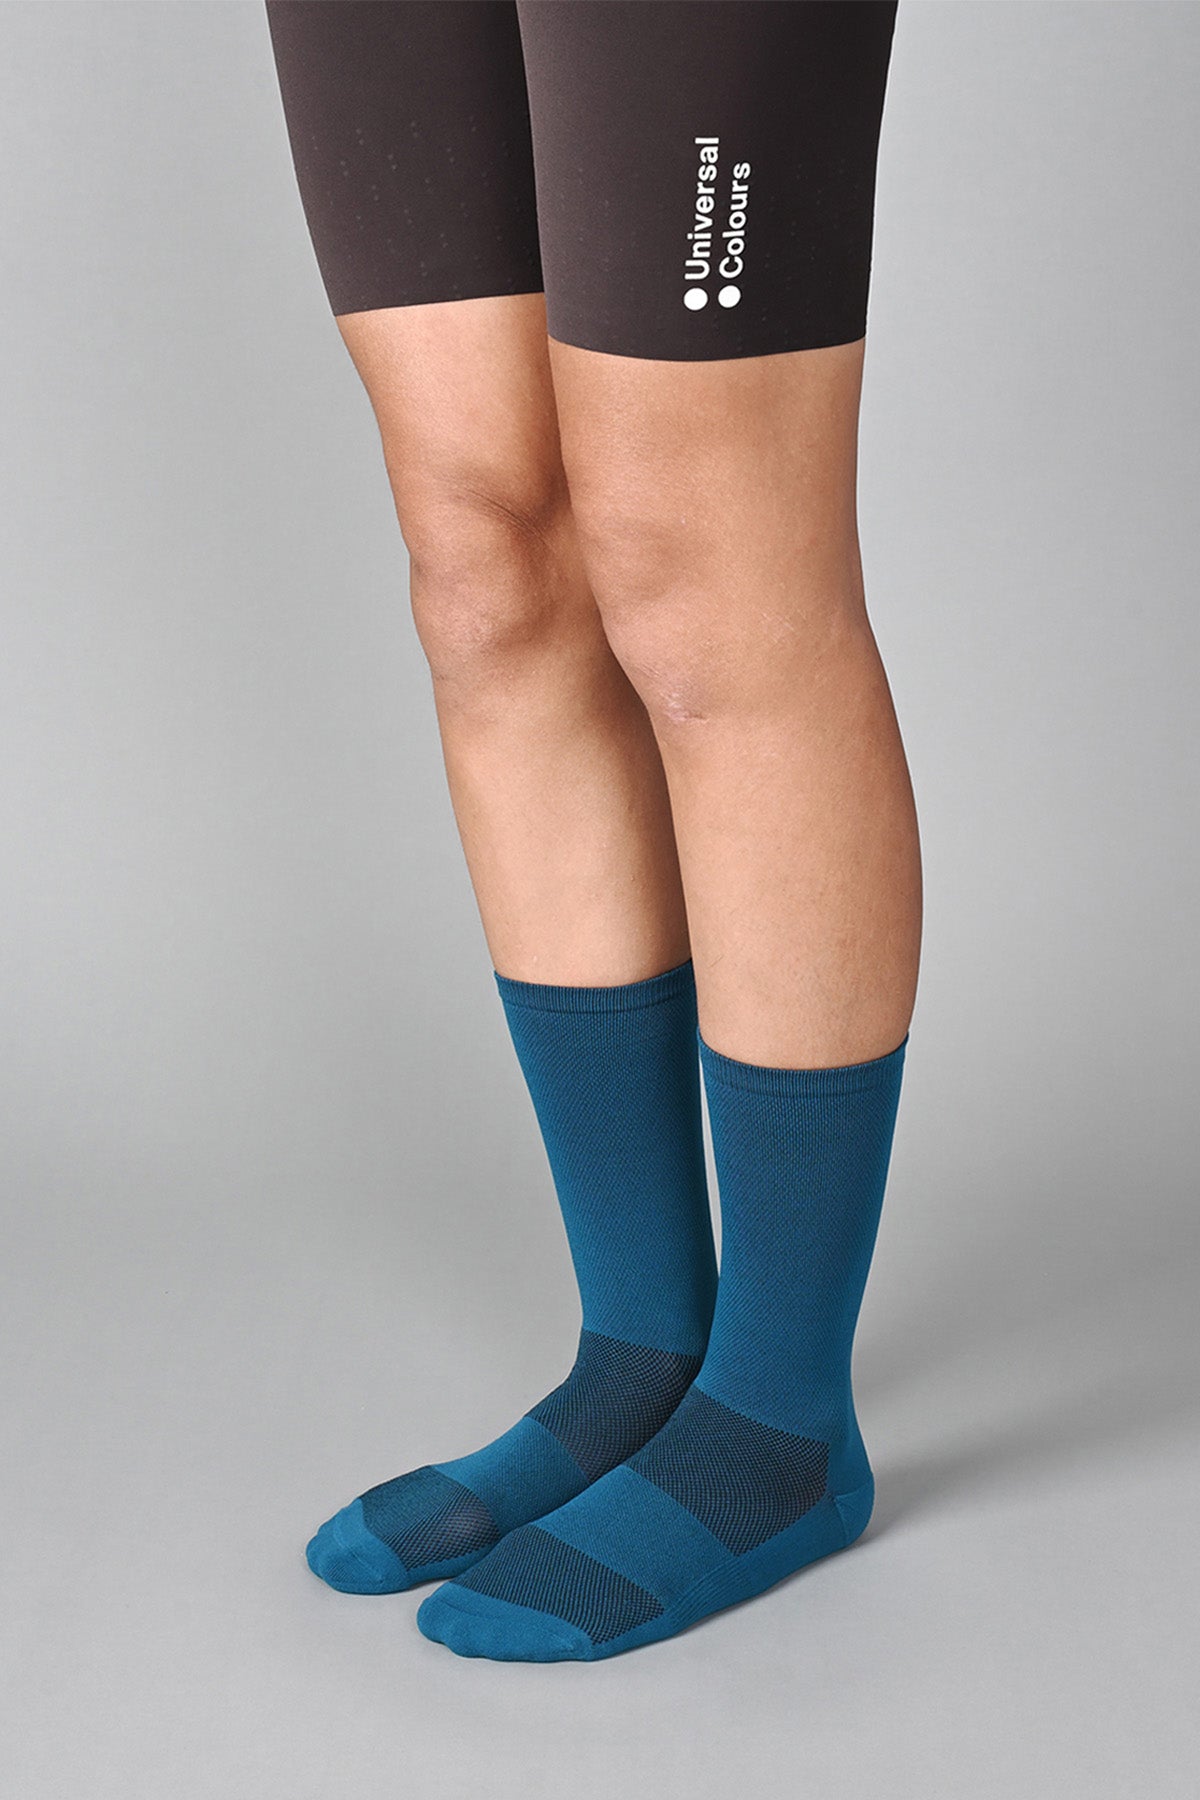 STEALTH - CG BLUE FRONT SIDE | BEST CYCLING SOCKS